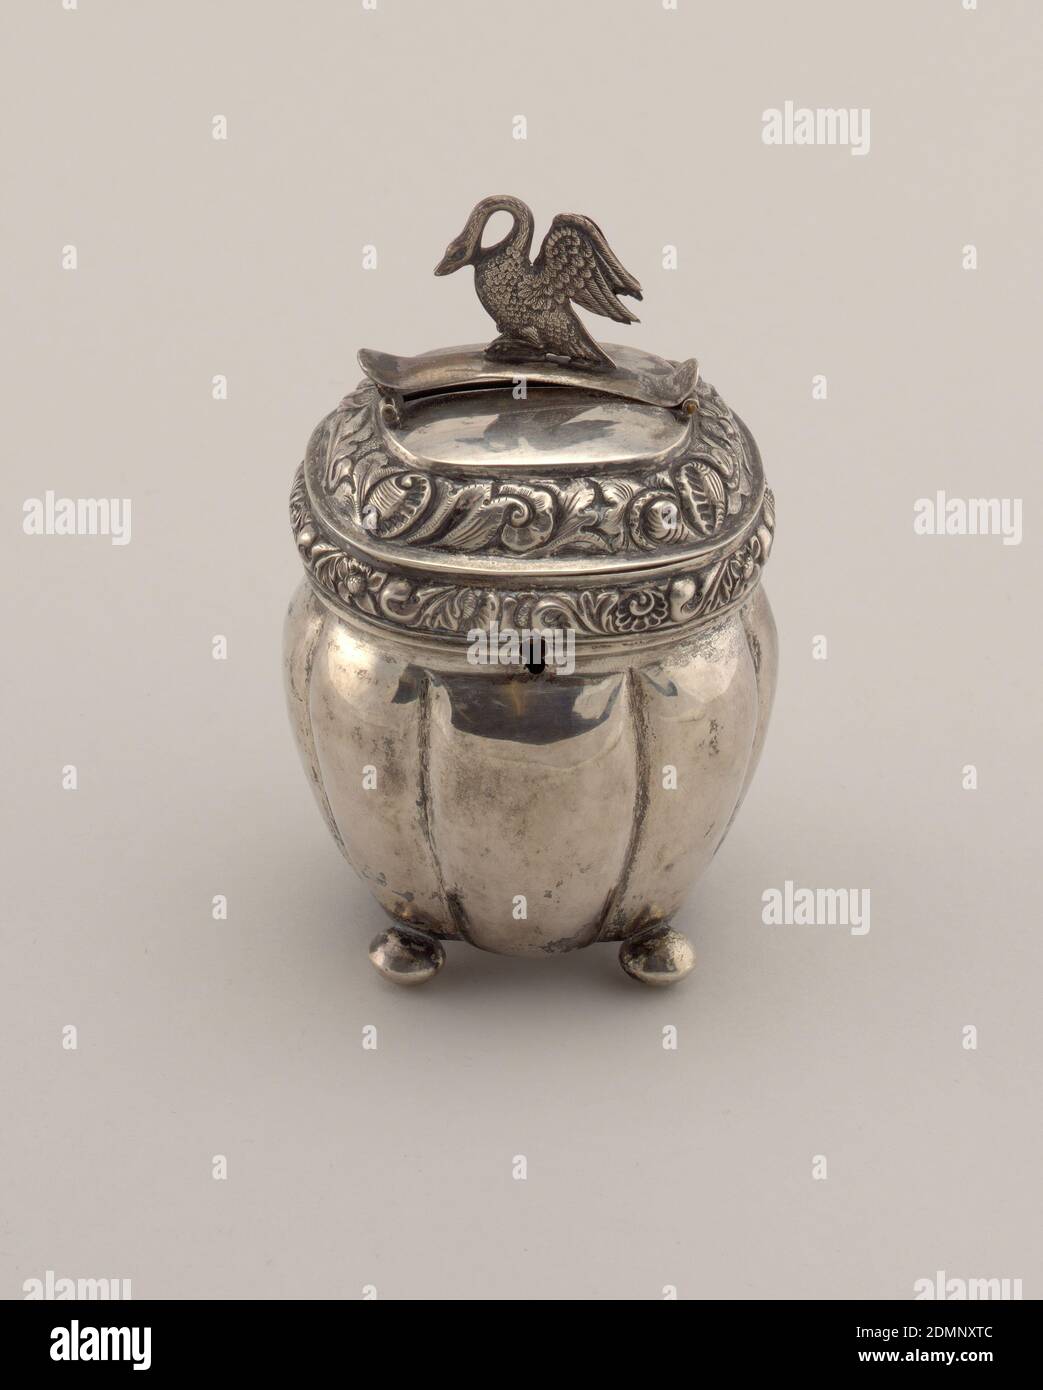 Coin bank, Silver, Coin bank with lobed body on ball feet. Lid with floral repousse work and chasing. Hinged finial with a cast swan. Keyhole at front center., Probably Netherlands, 19th century, metalwork, Decorative Arts, Coin bank Stock Photo